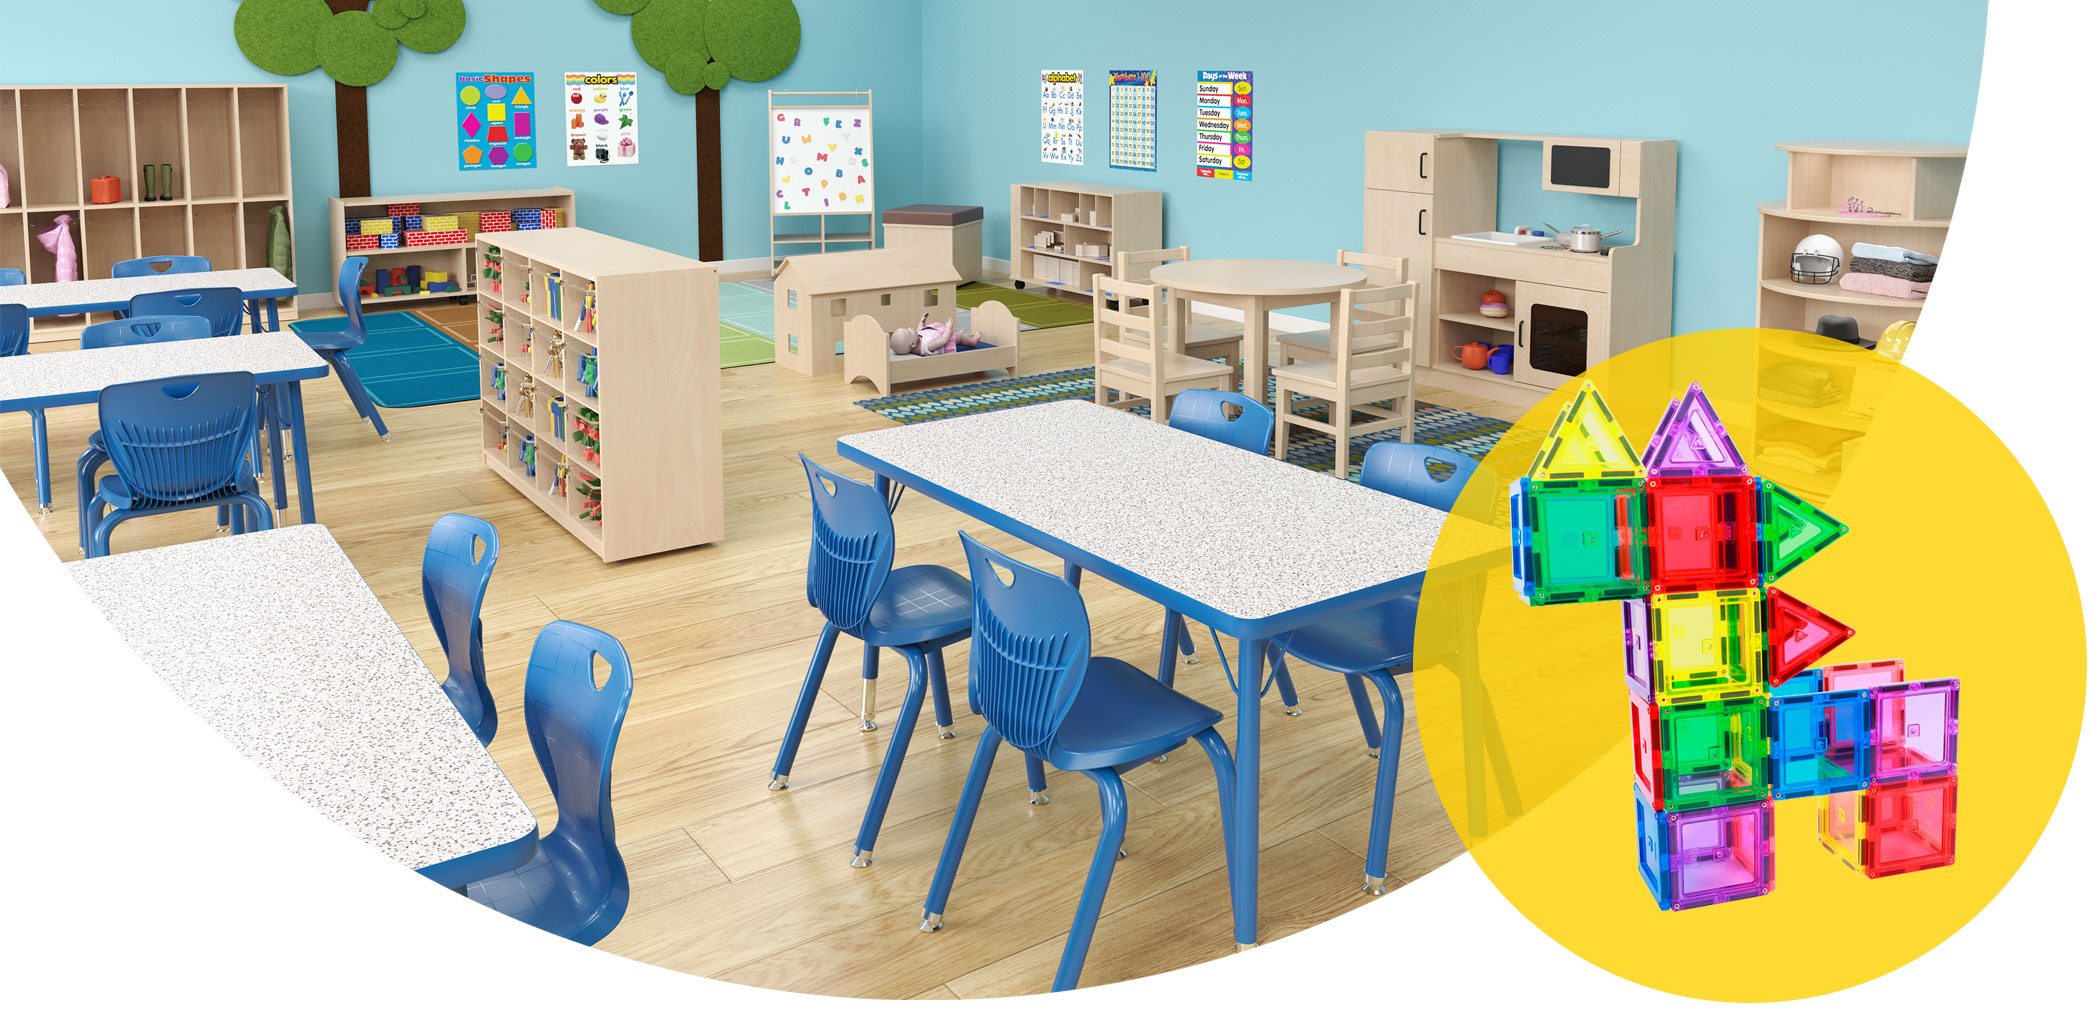 Early childhood classroom with a yellow bubble overlaid the right with magnitiles inside